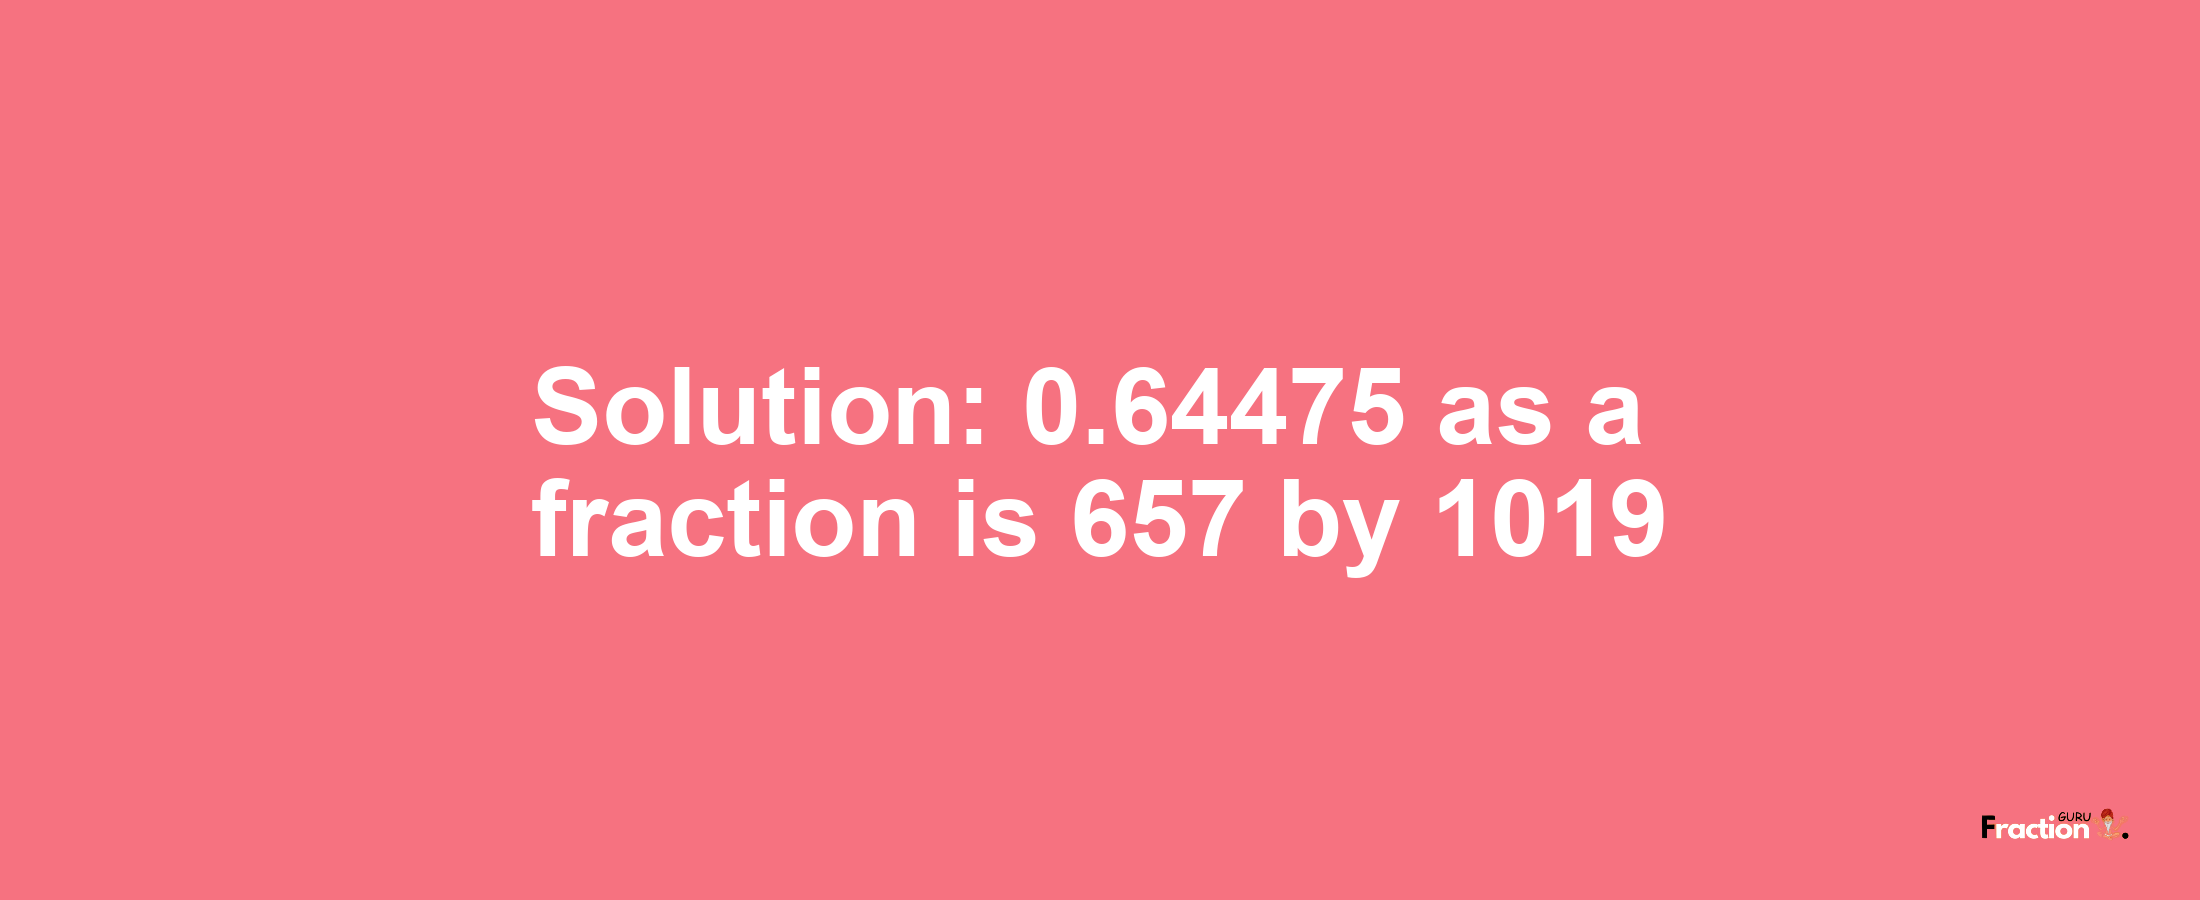 Solution:0.64475 as a fraction is 657/1019